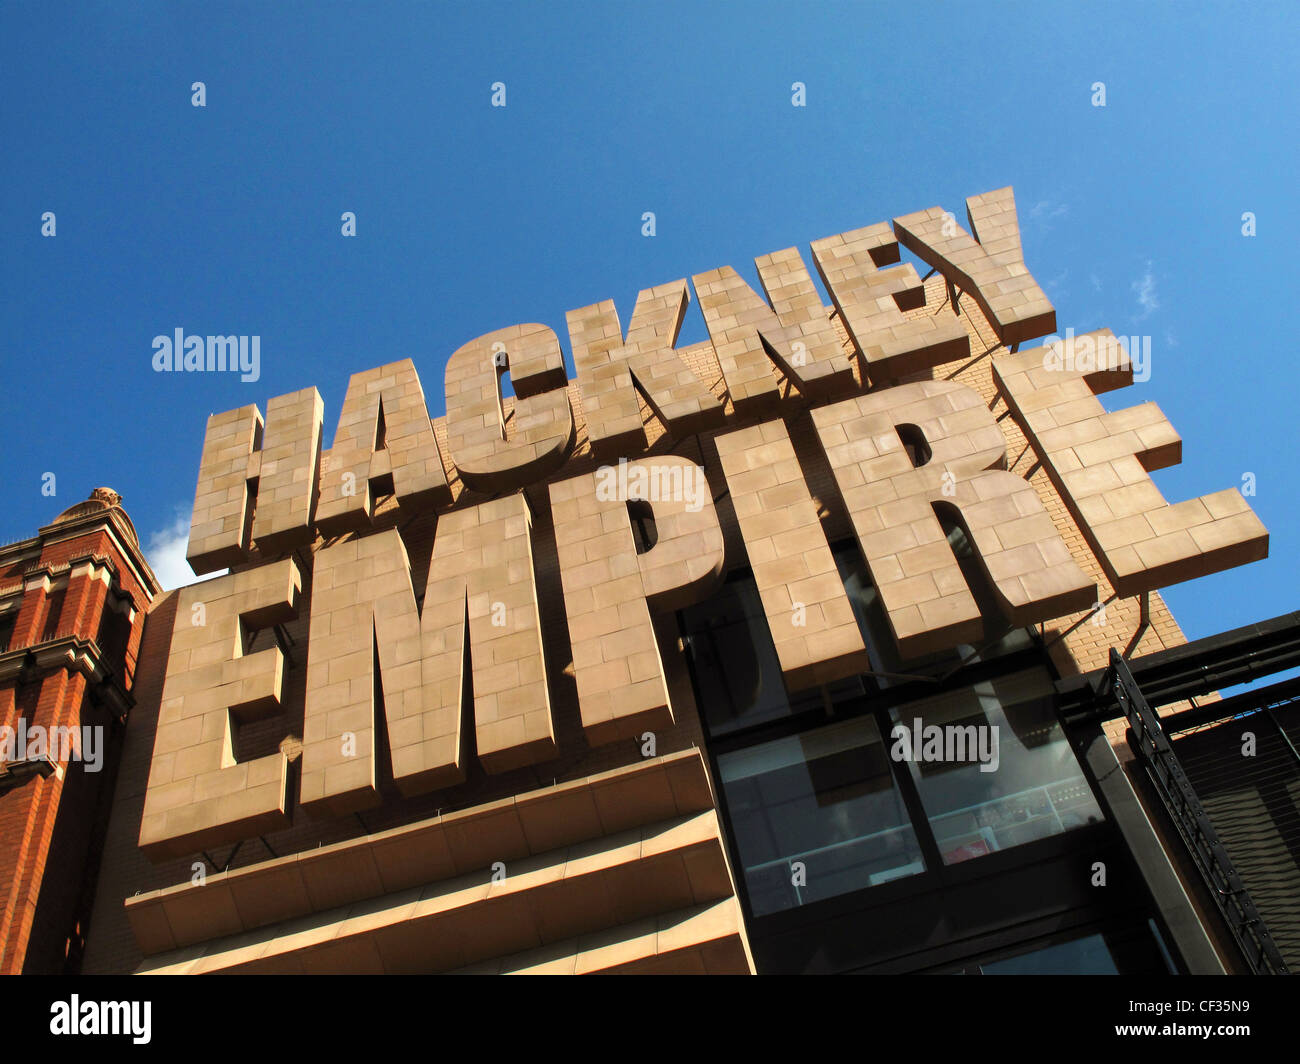 Exterior of the Hackney Empire in Mare Street. Hackney Empire was built in 1901 and opened as a music hall. The venue offers hig Stock Photo